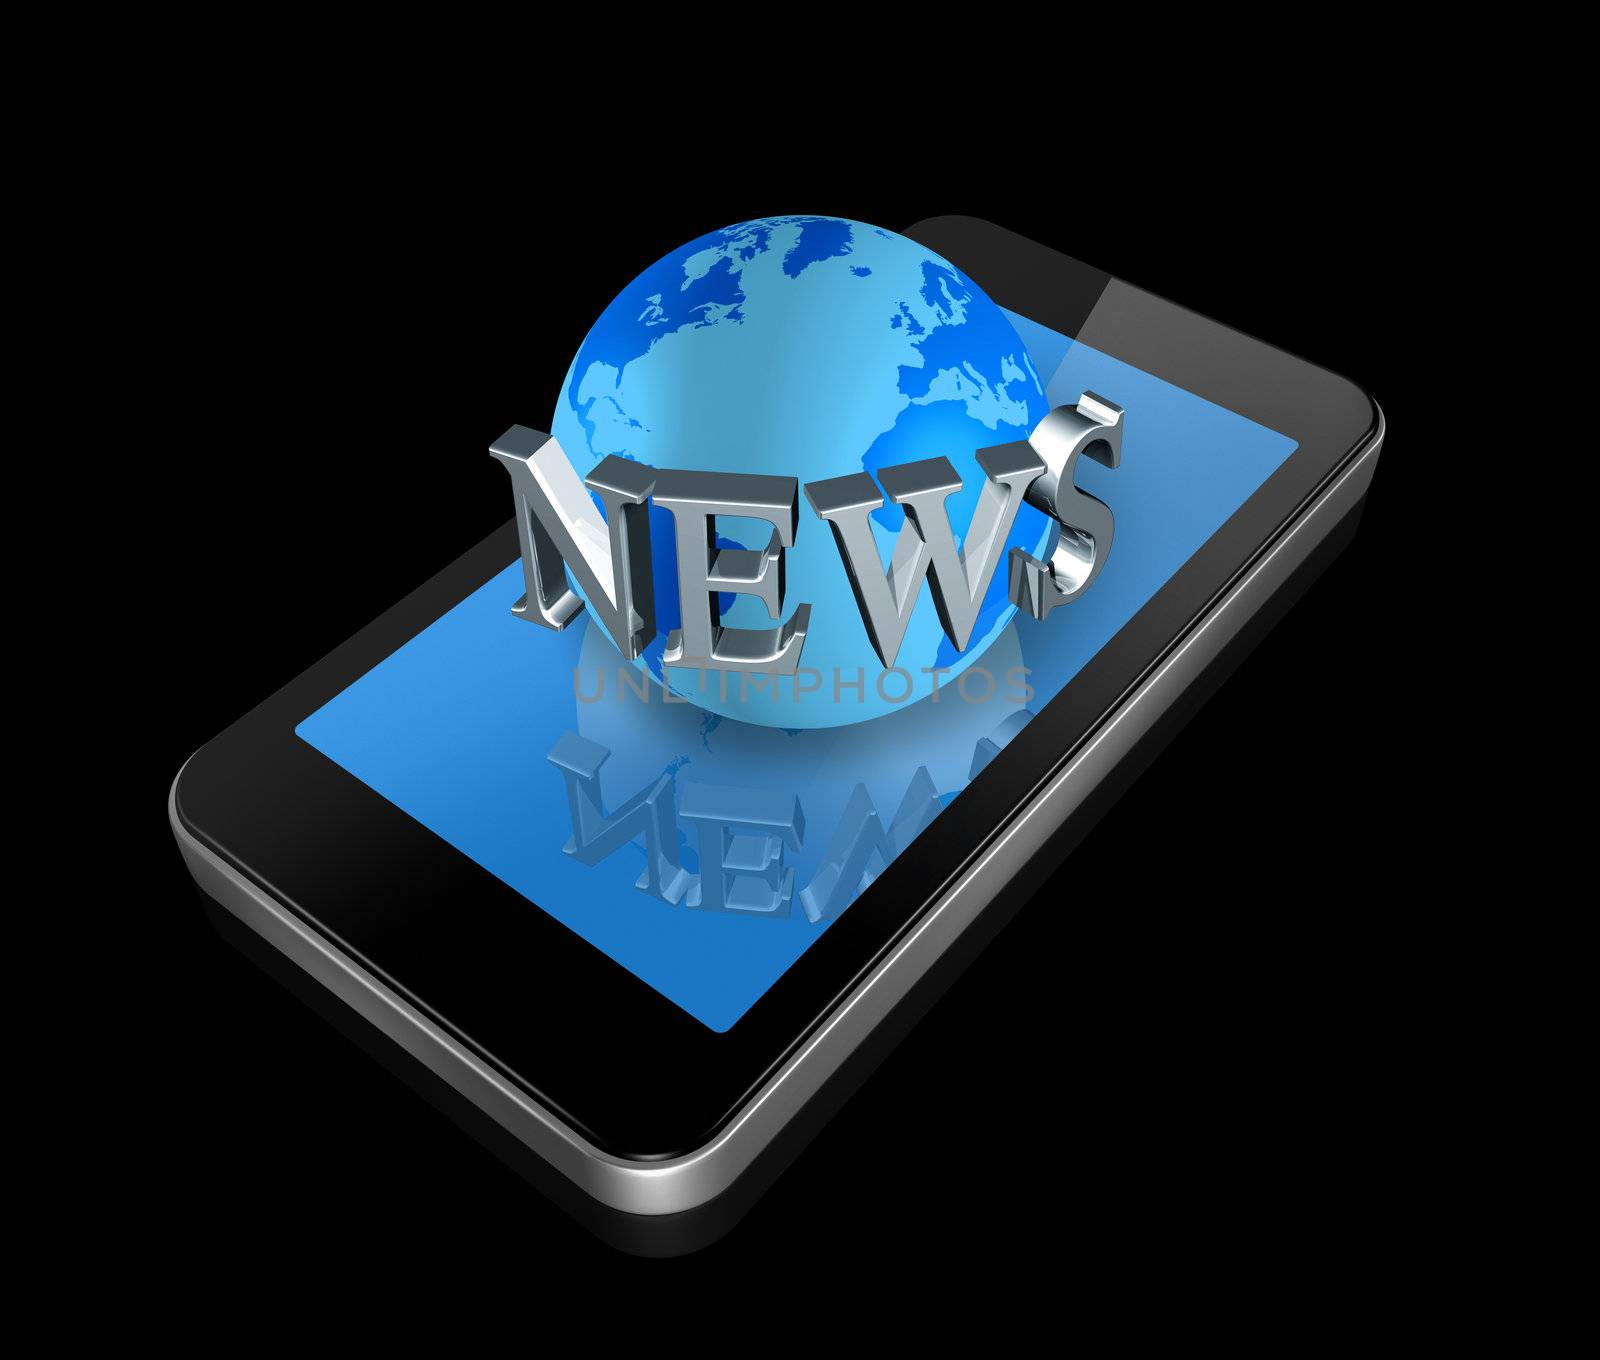 three dimensional mobile phone and news world globe isolated on black whith clipping path